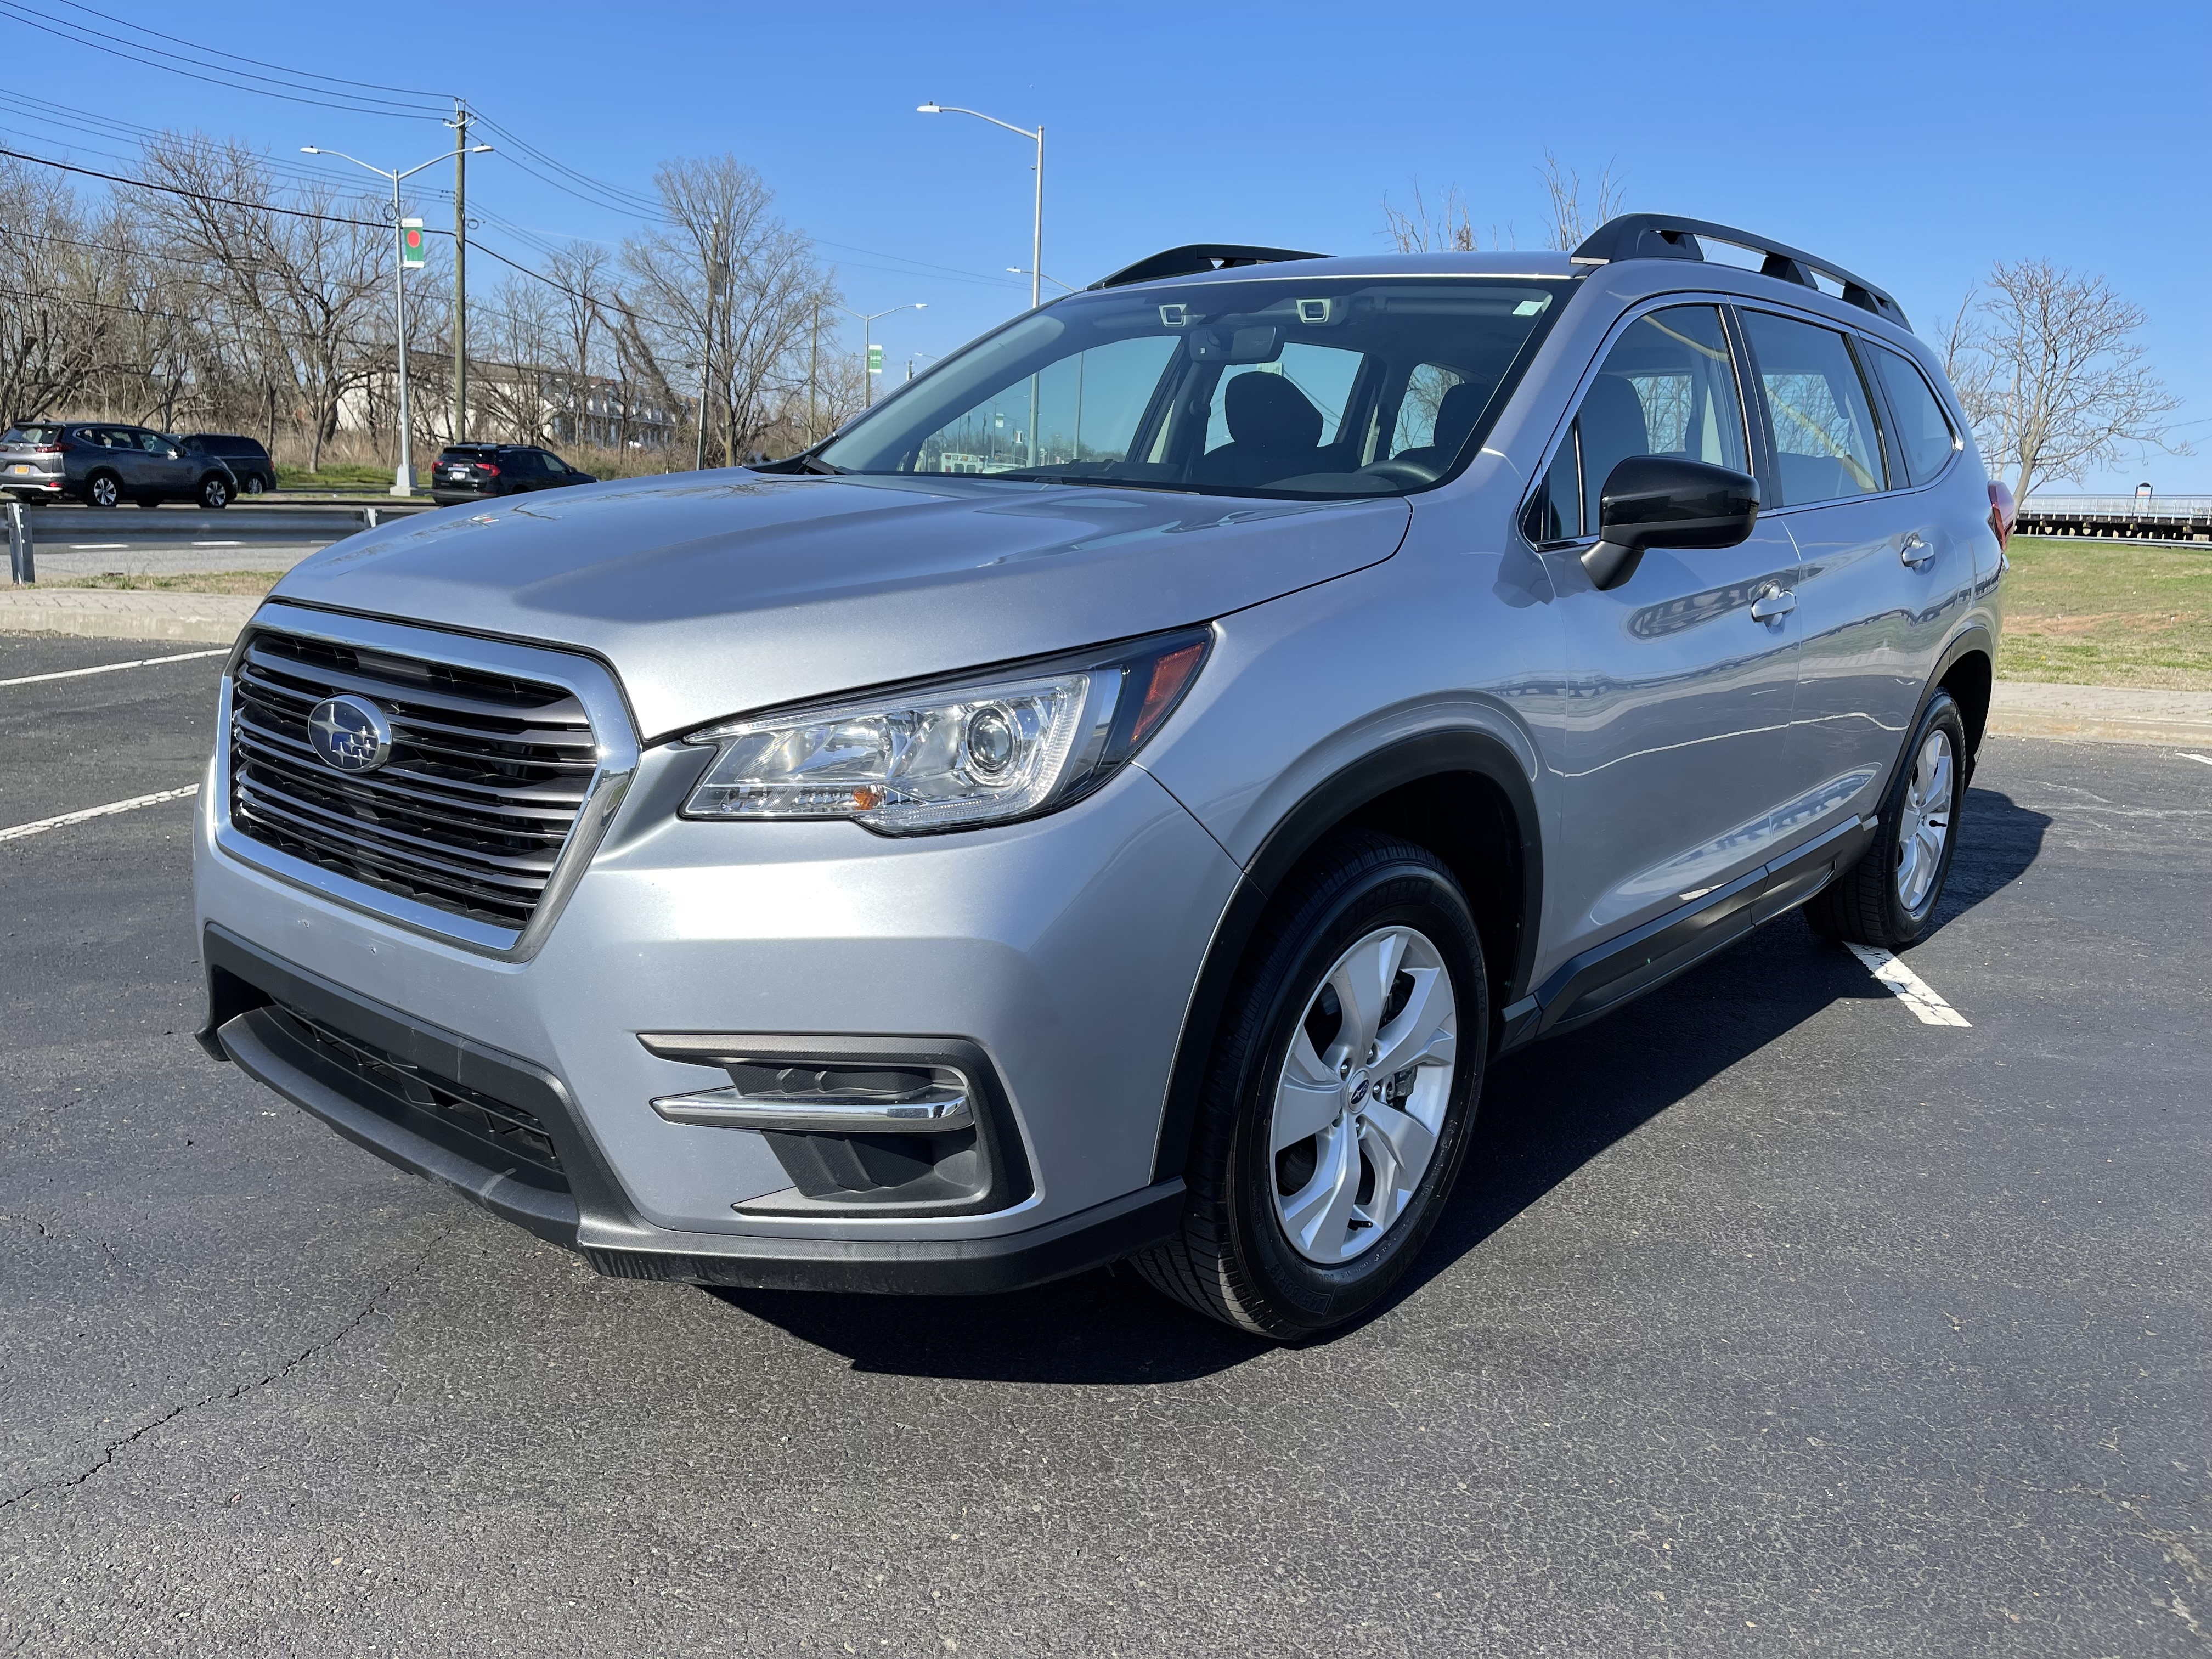 Used Car - 2020 Subaru Ascent AWD for Sale in Staten Island, NY